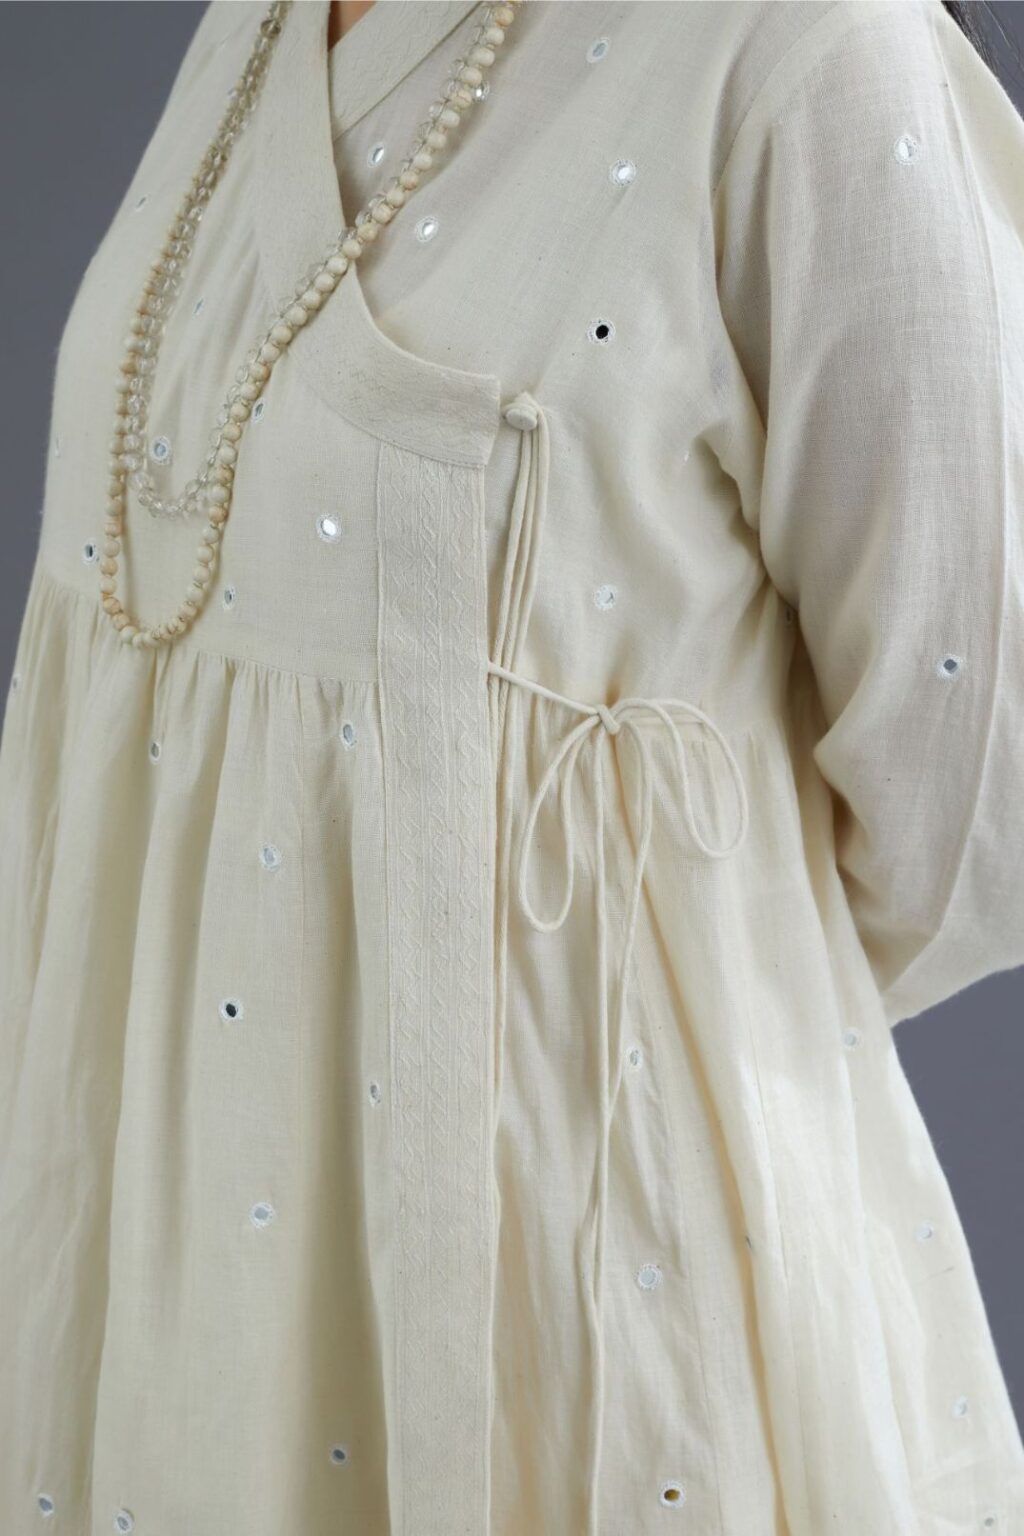 Off white Handspun Hand-Woven cotton short angrakha kurta set with  embroidered over-lapped neckline and mirror hand work